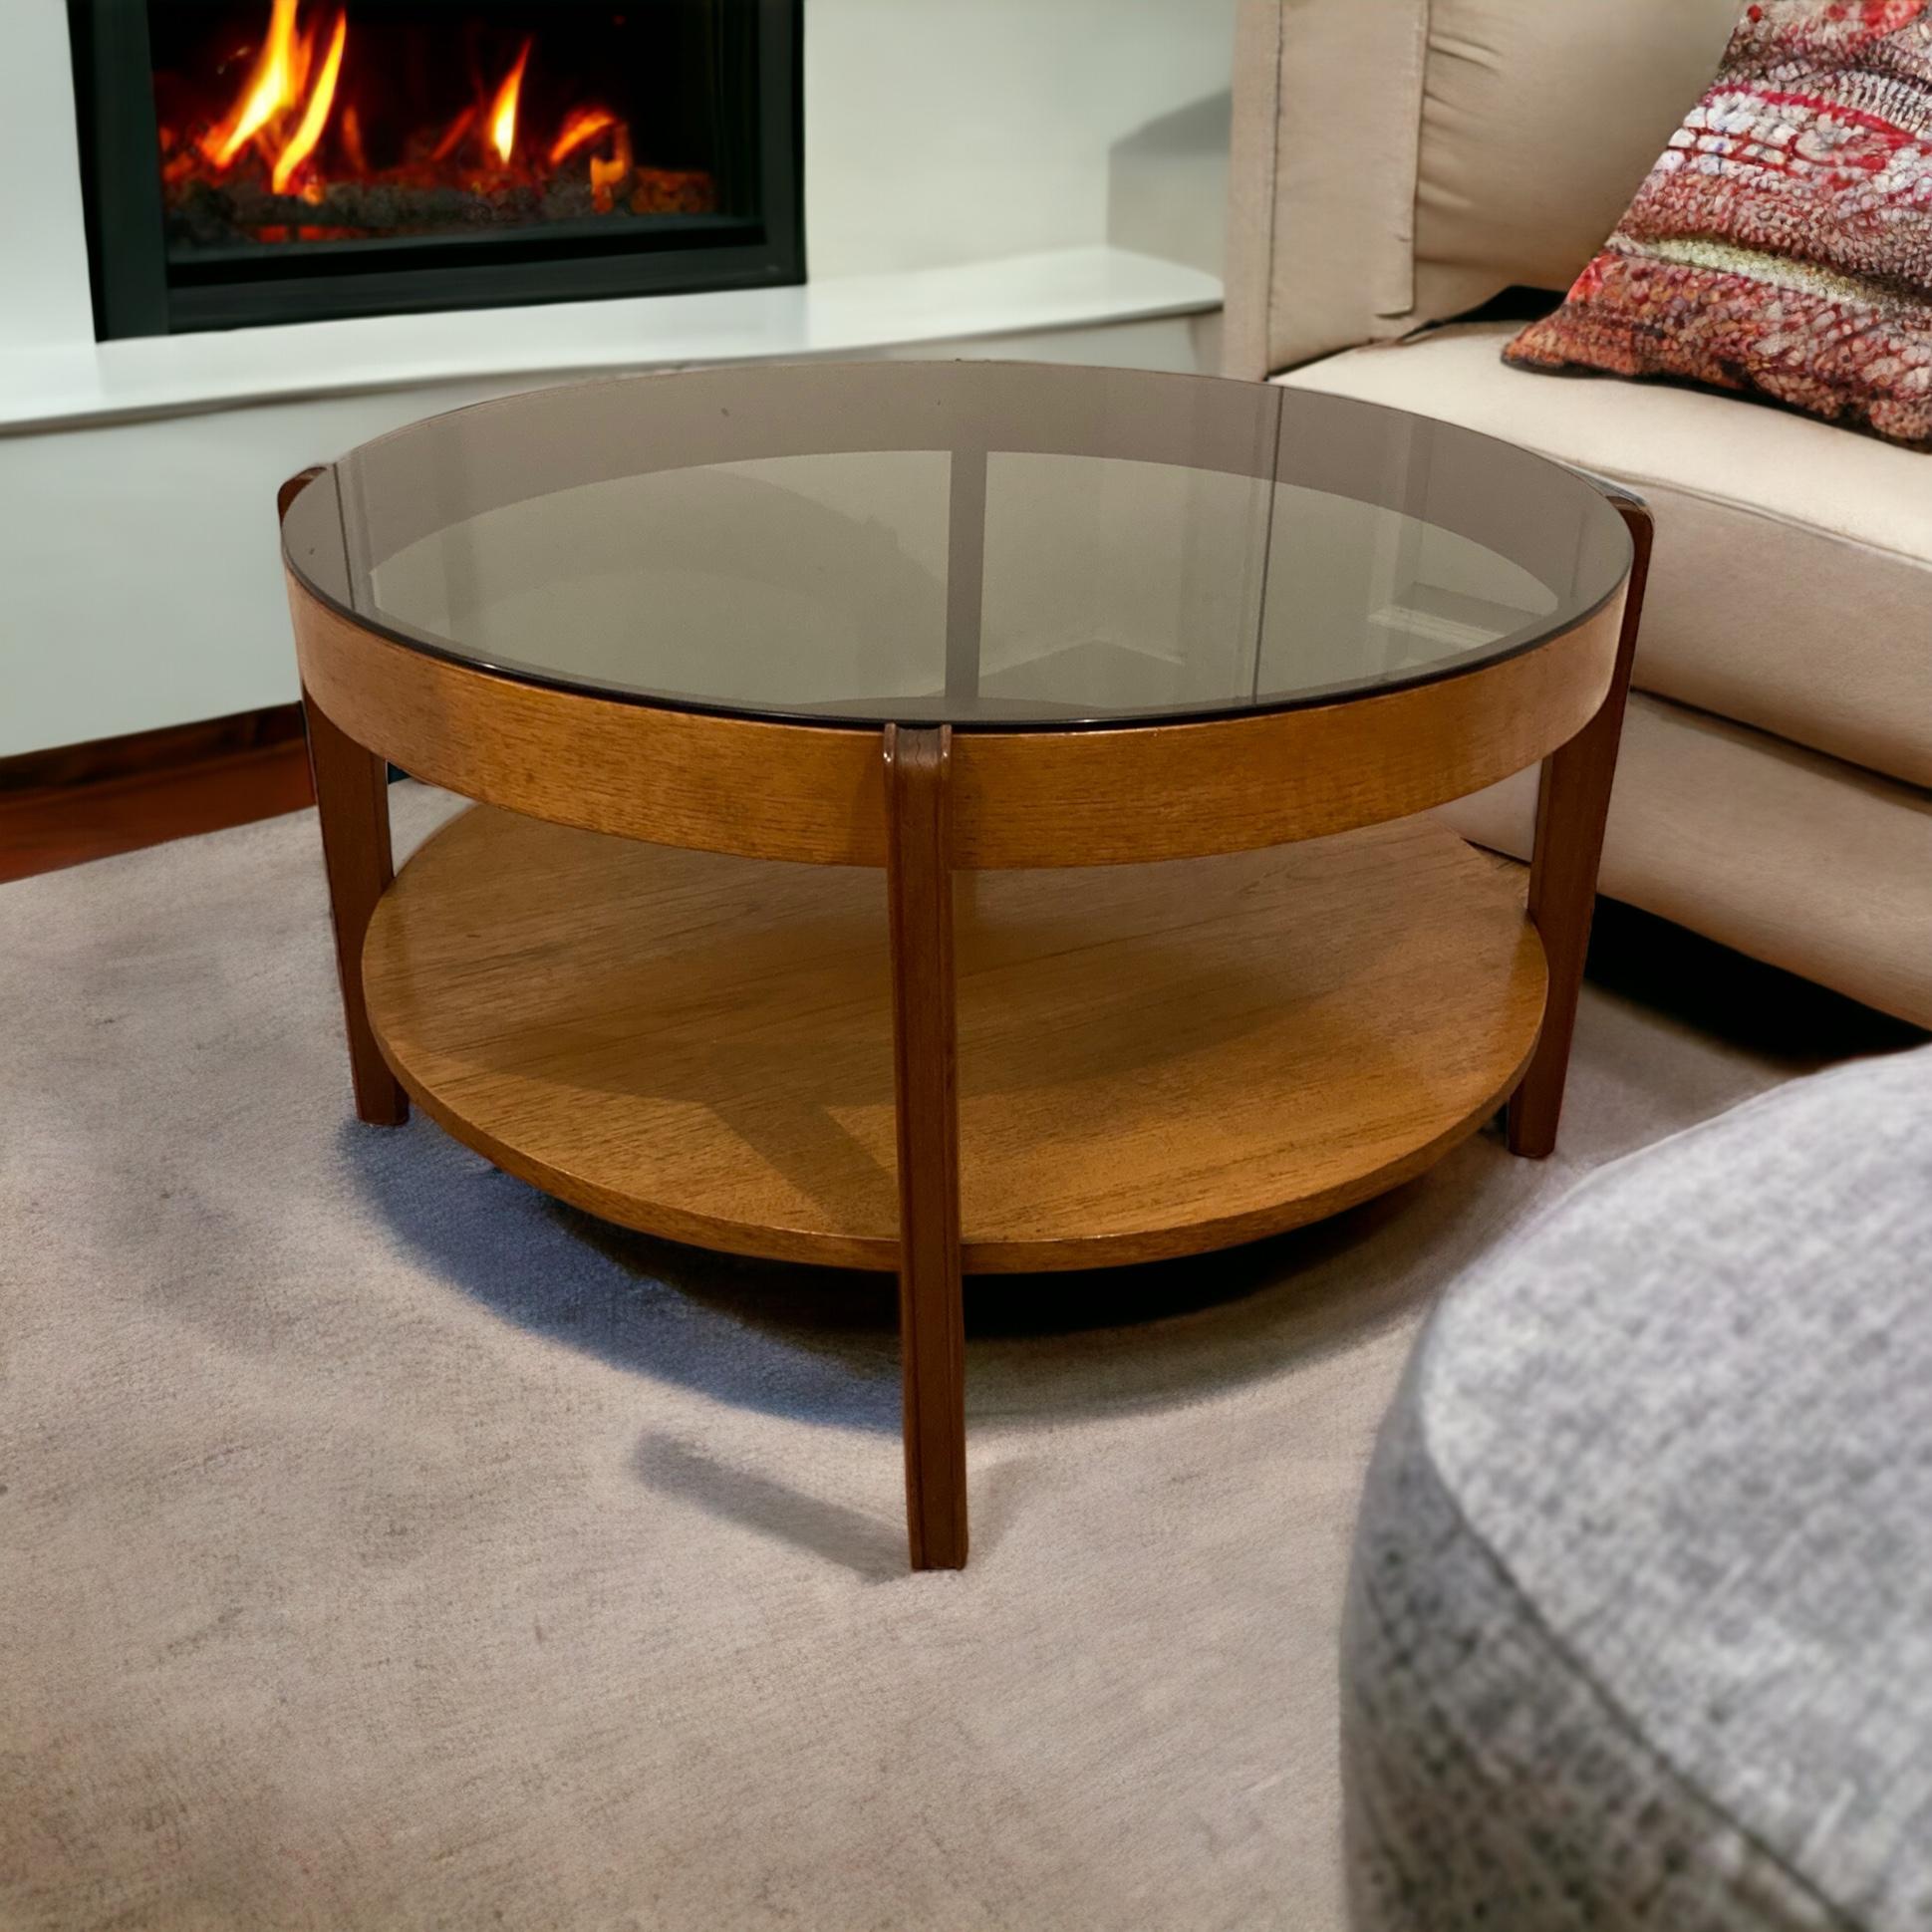 British Mid Century Modern round Teak Coffee Table, smoked glass by Remploy of England.